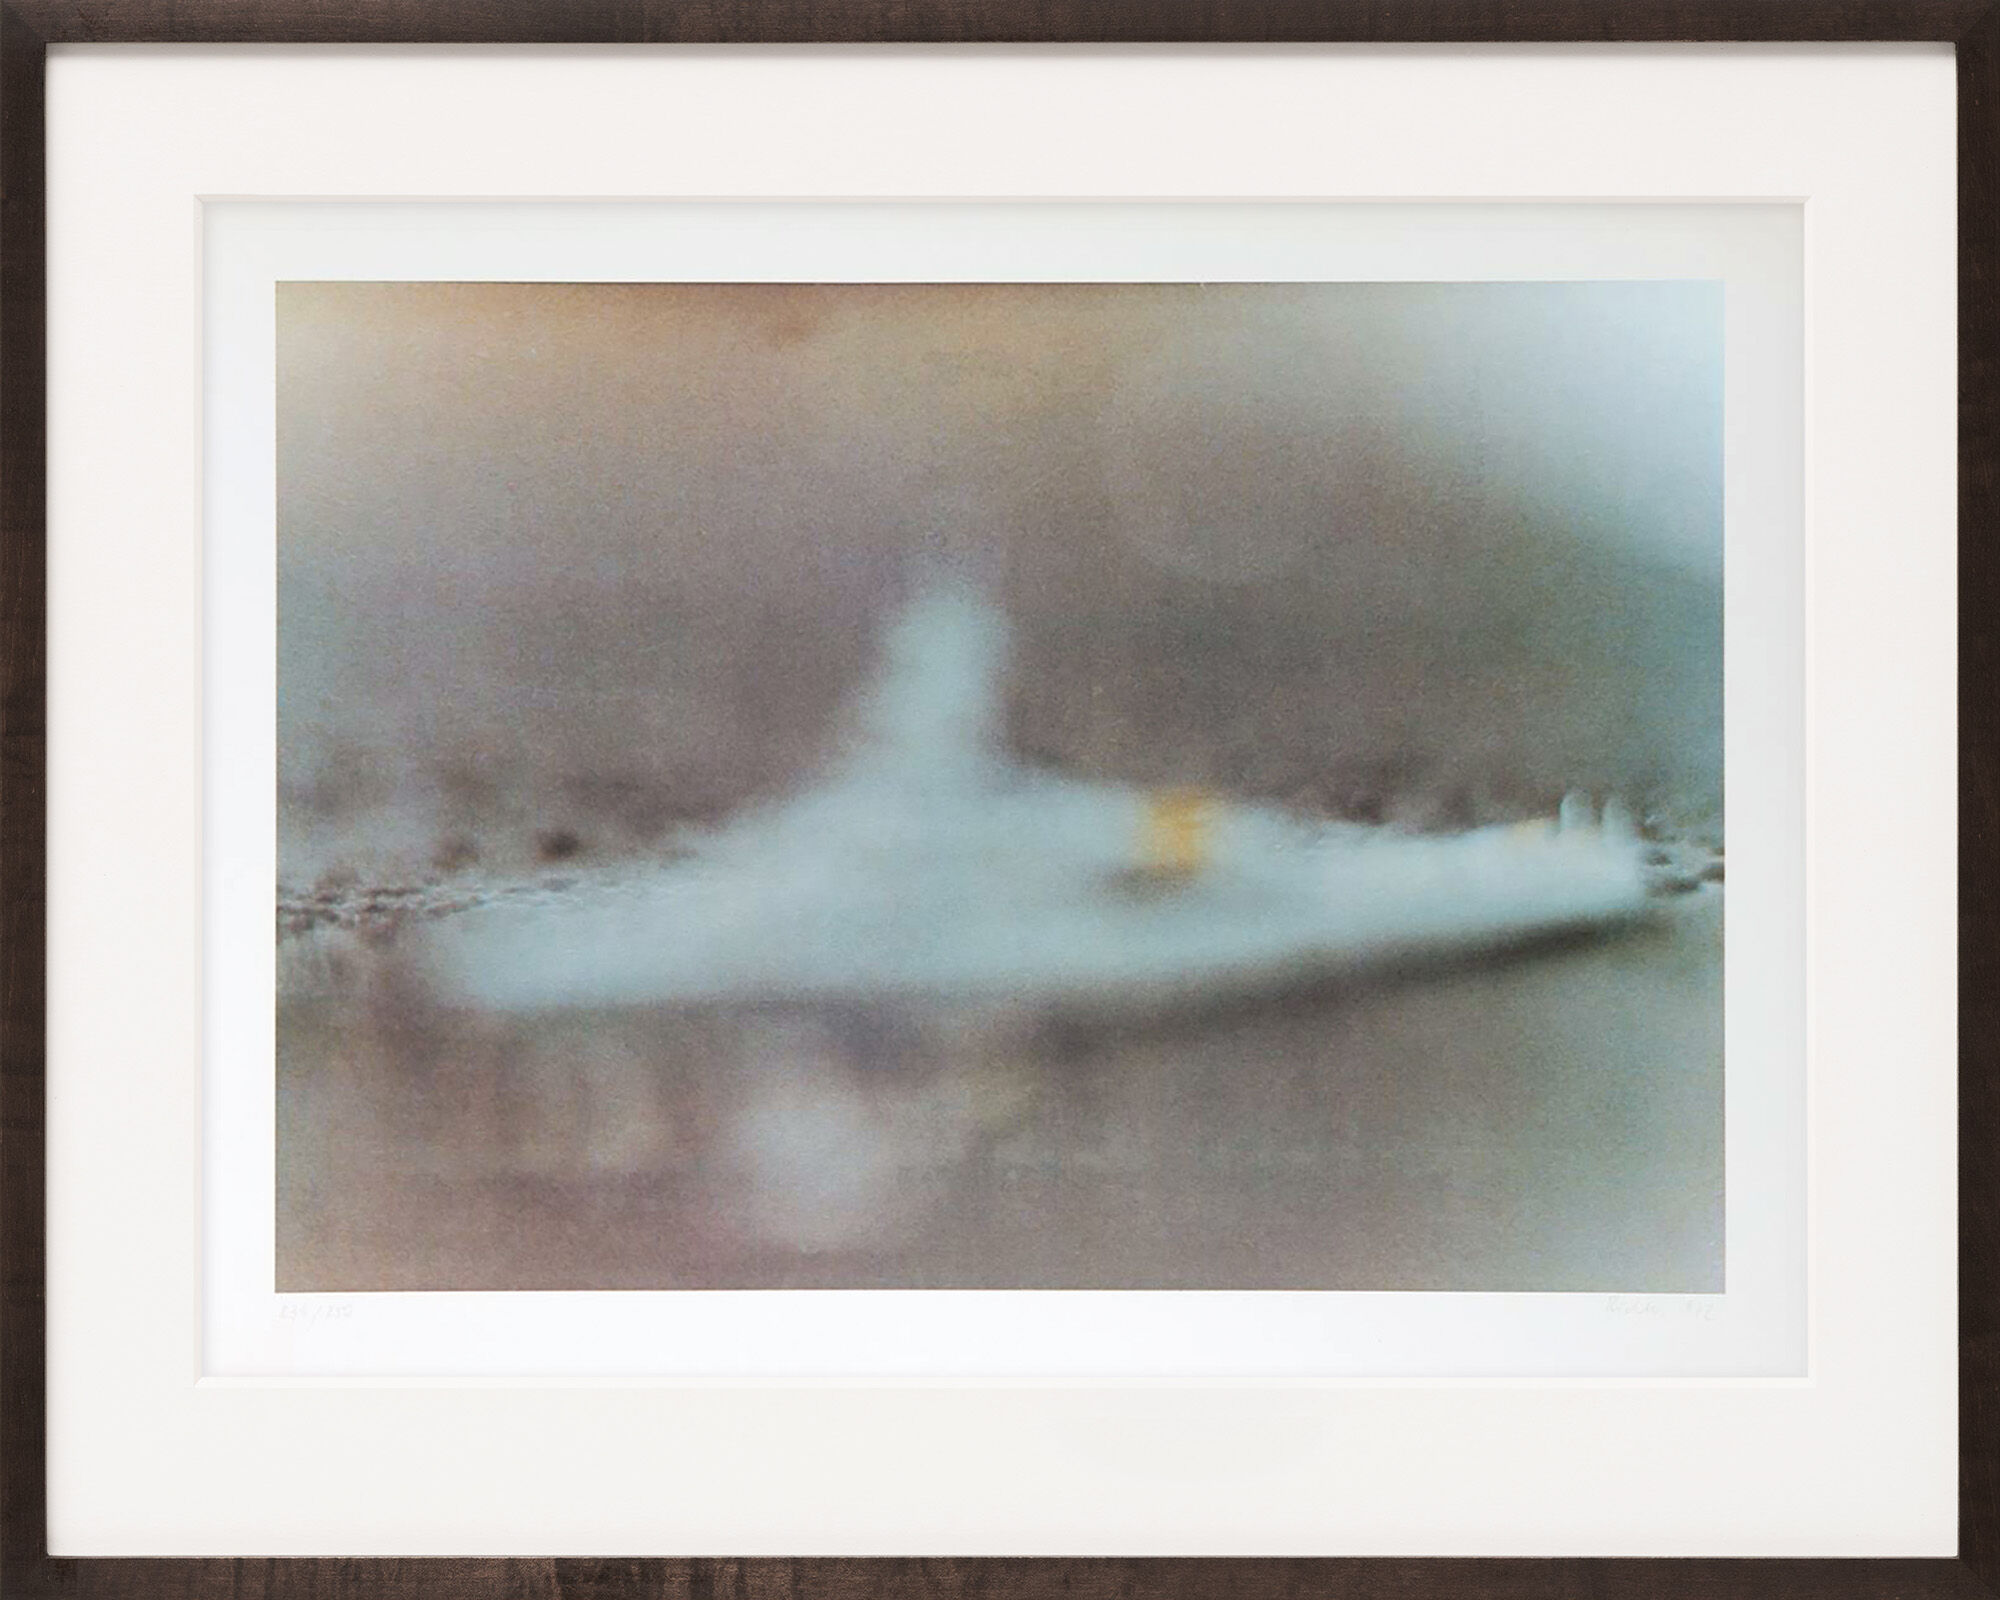 Picture "Ship" (1972) by Gerhard Richter